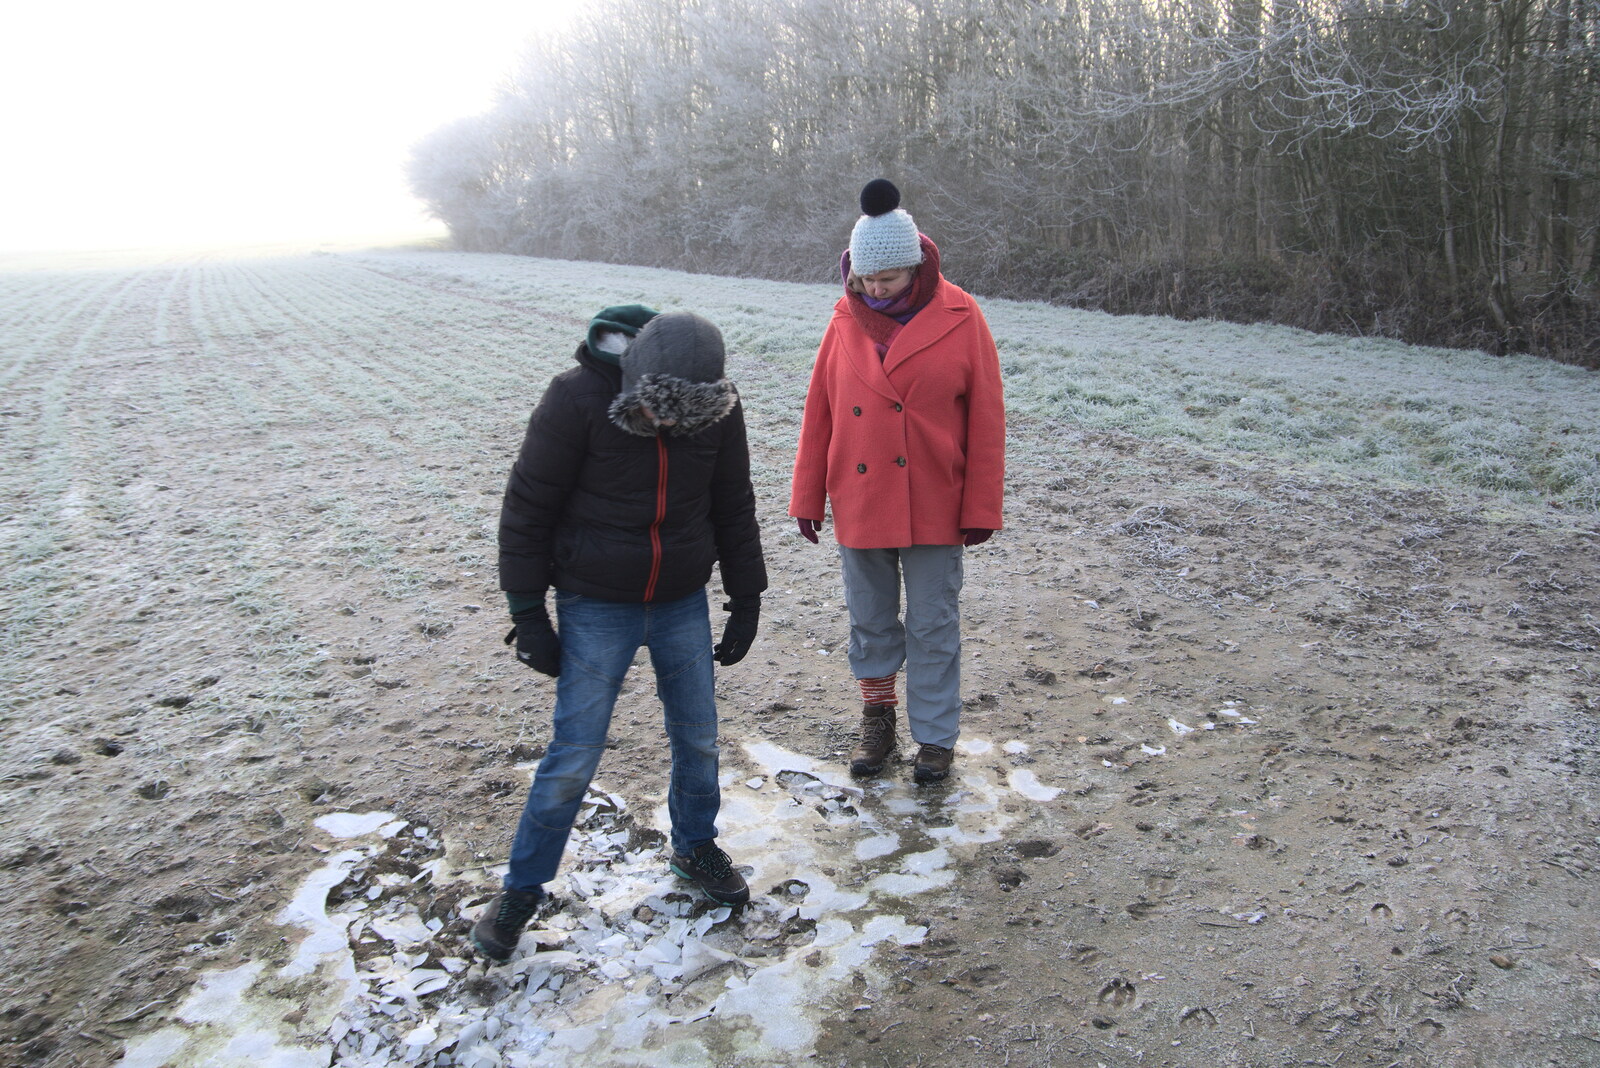 A Frosty Walk Around Brome, Suffolk - 22nd January 2023: Fred stomps on some ice